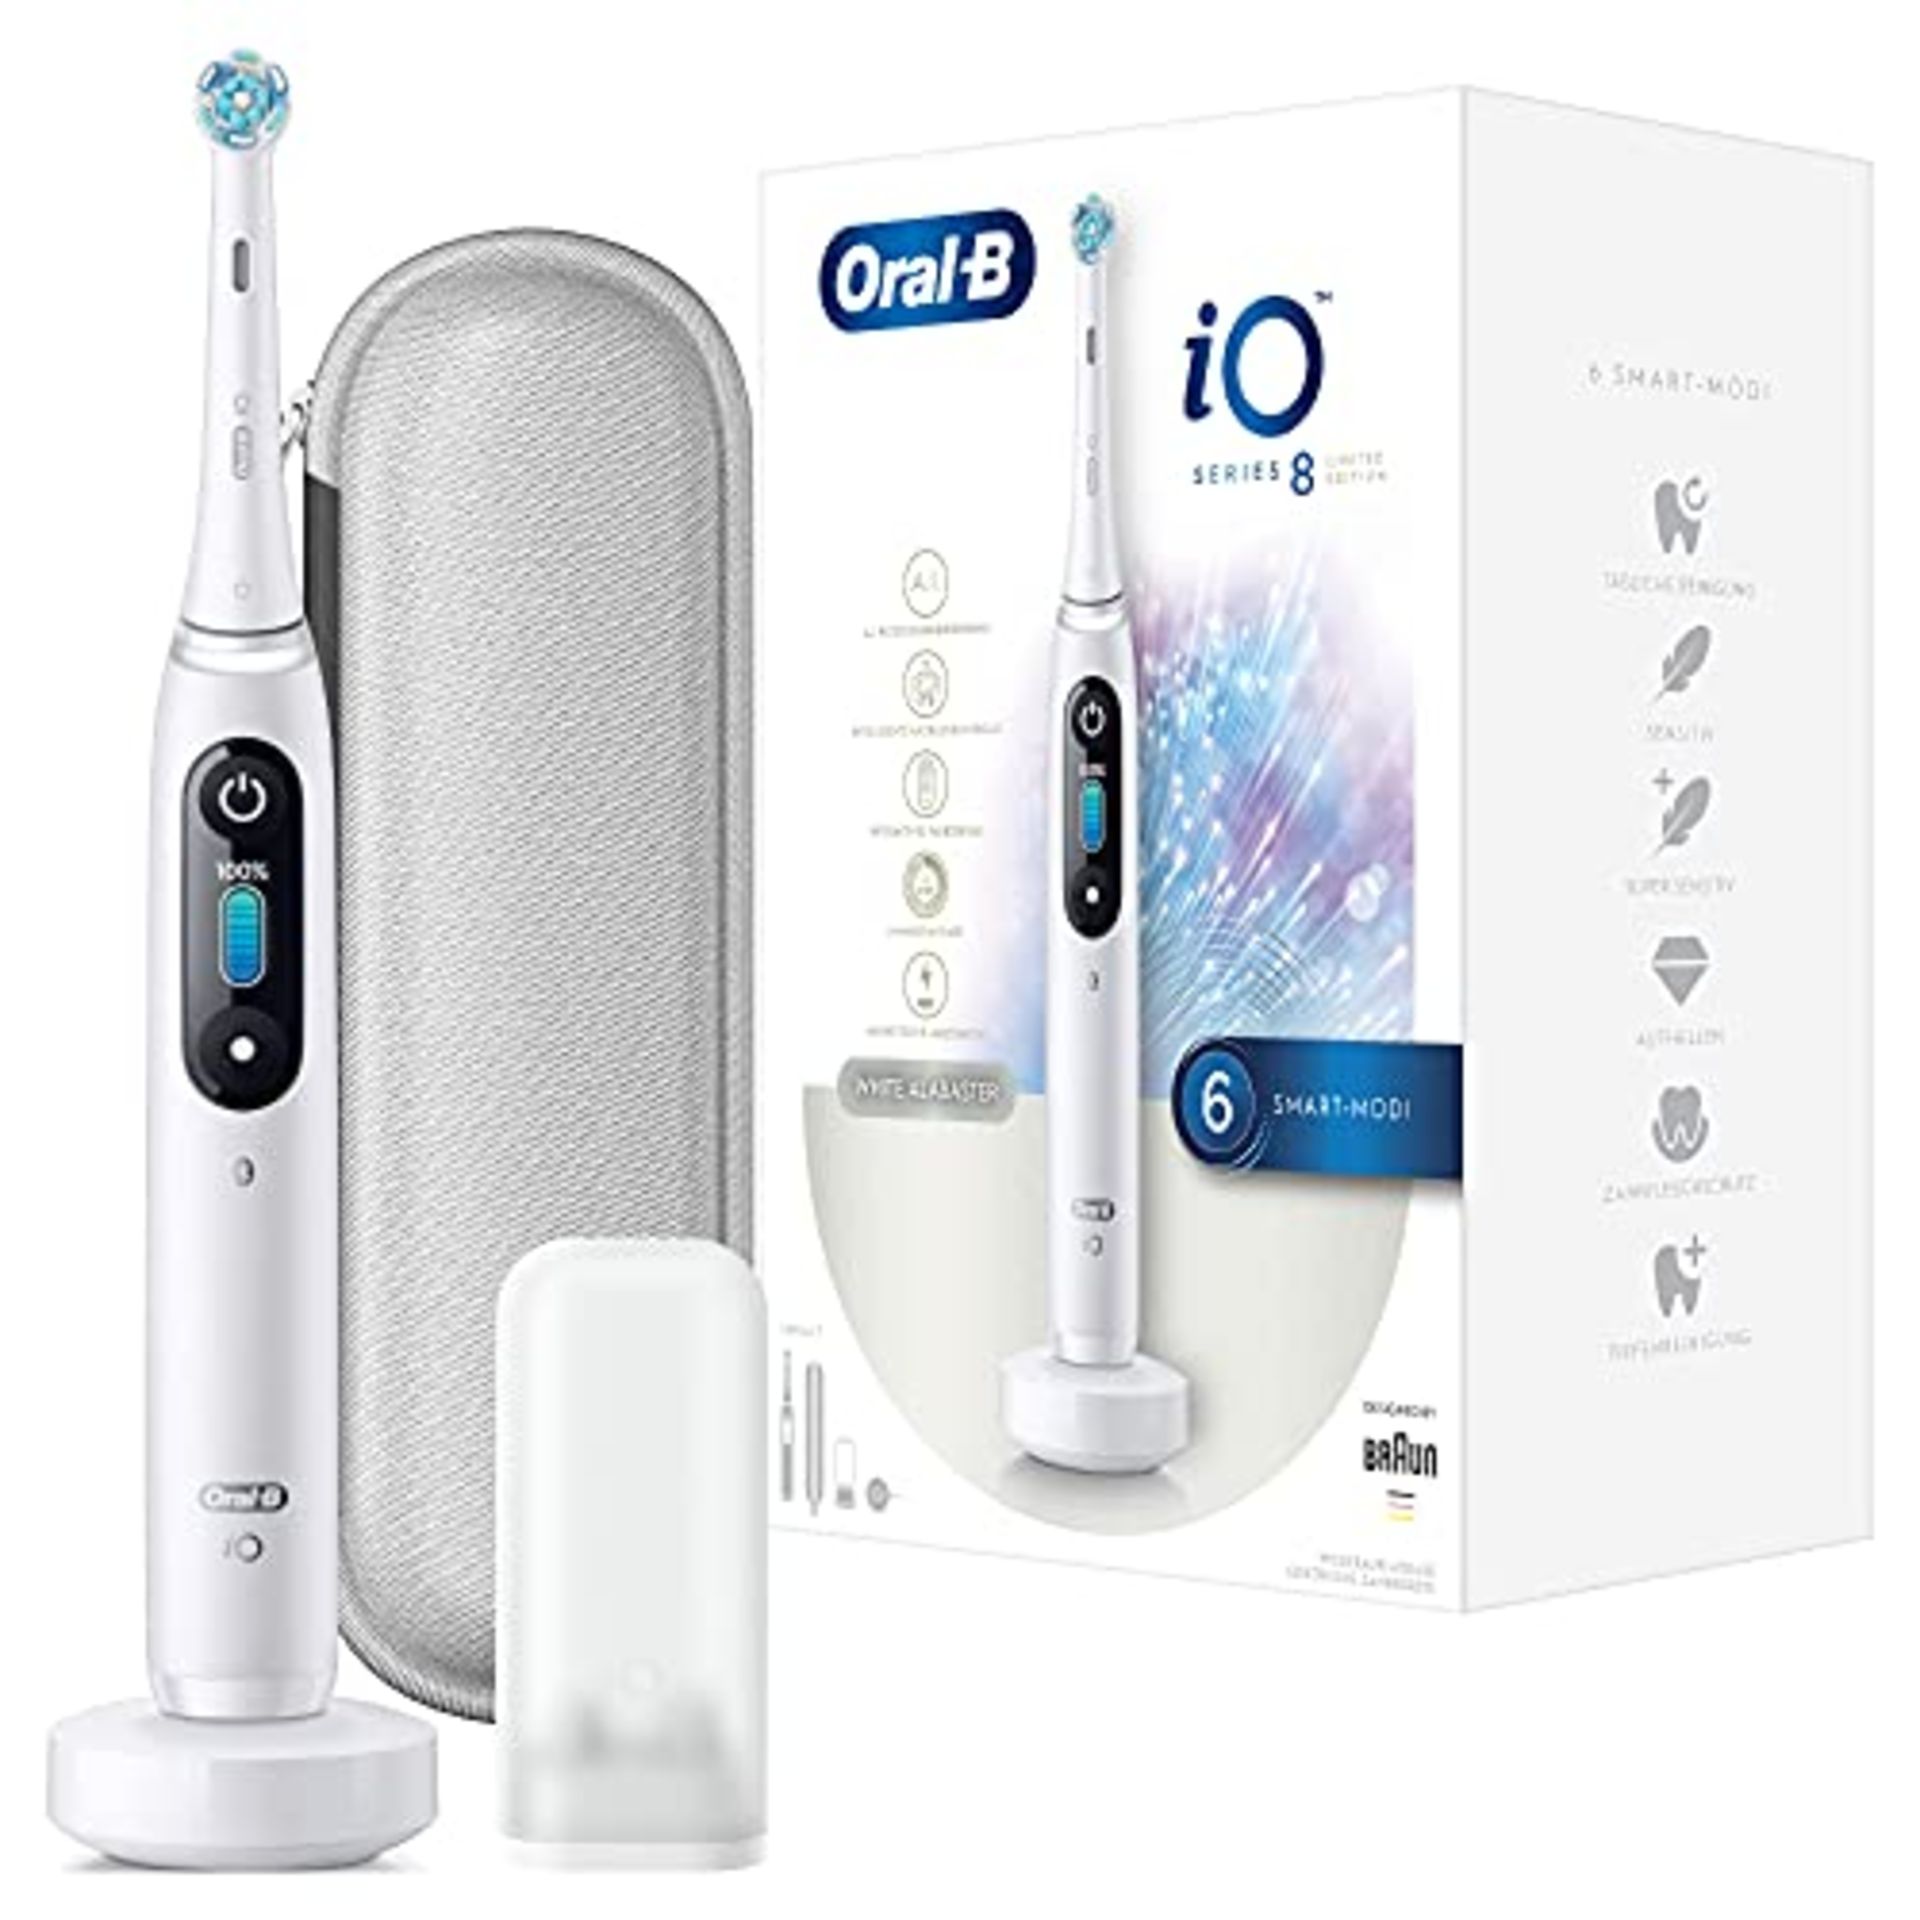 RRP £197.00 Oral-B iO Series 8 Electric Toothbrush, 6 cleaning modes for dental care, magnetic tec